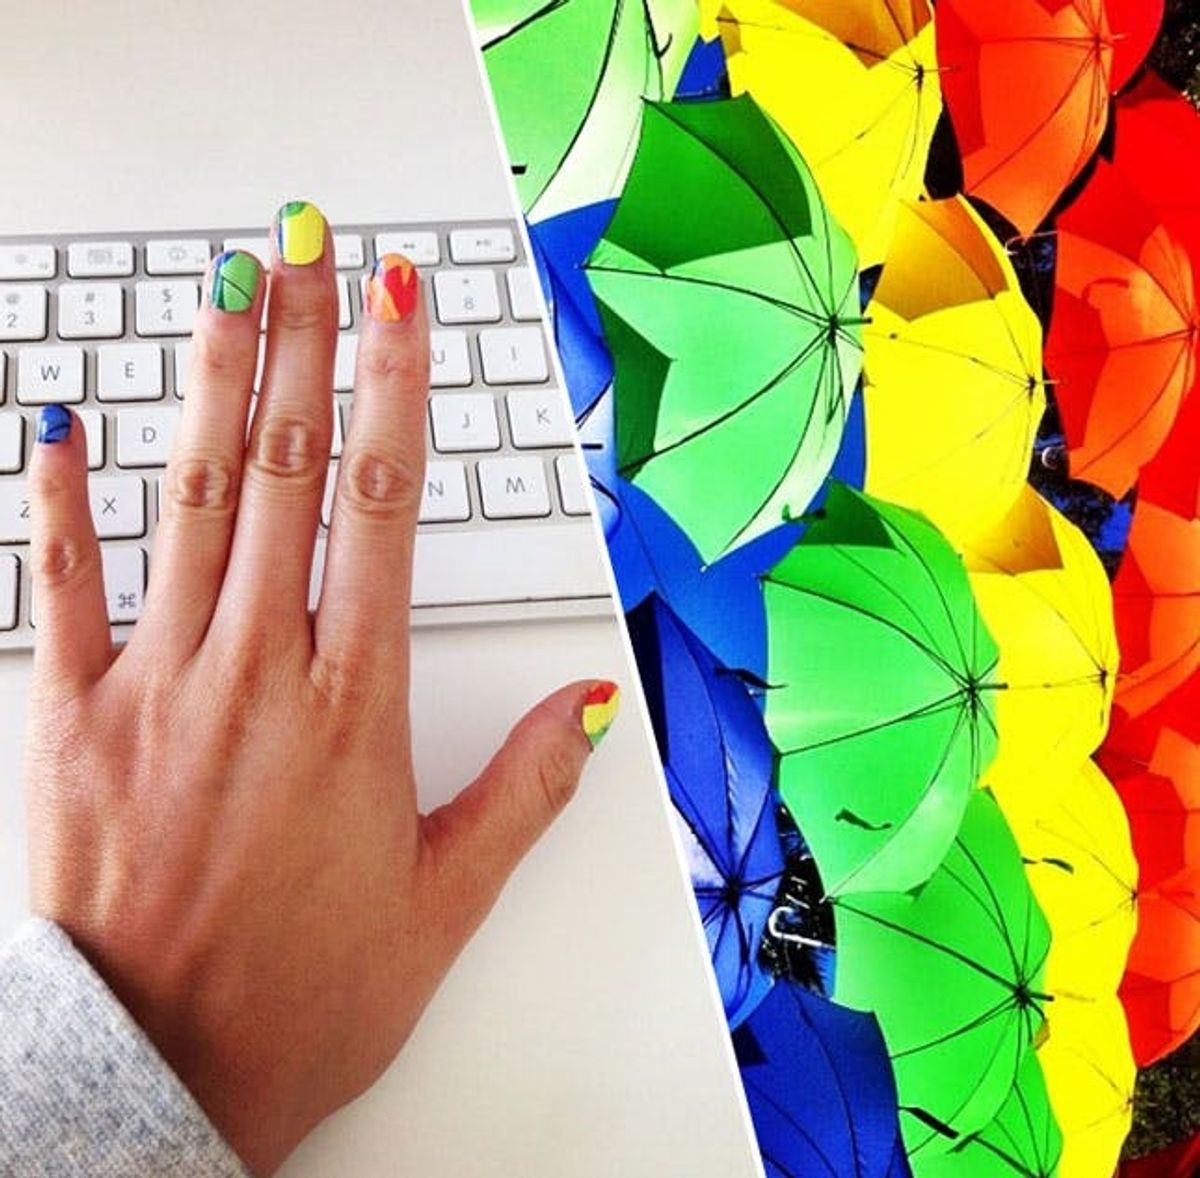 WHAT?! Now You Can Turn Your Photos into Custom Nail Art!